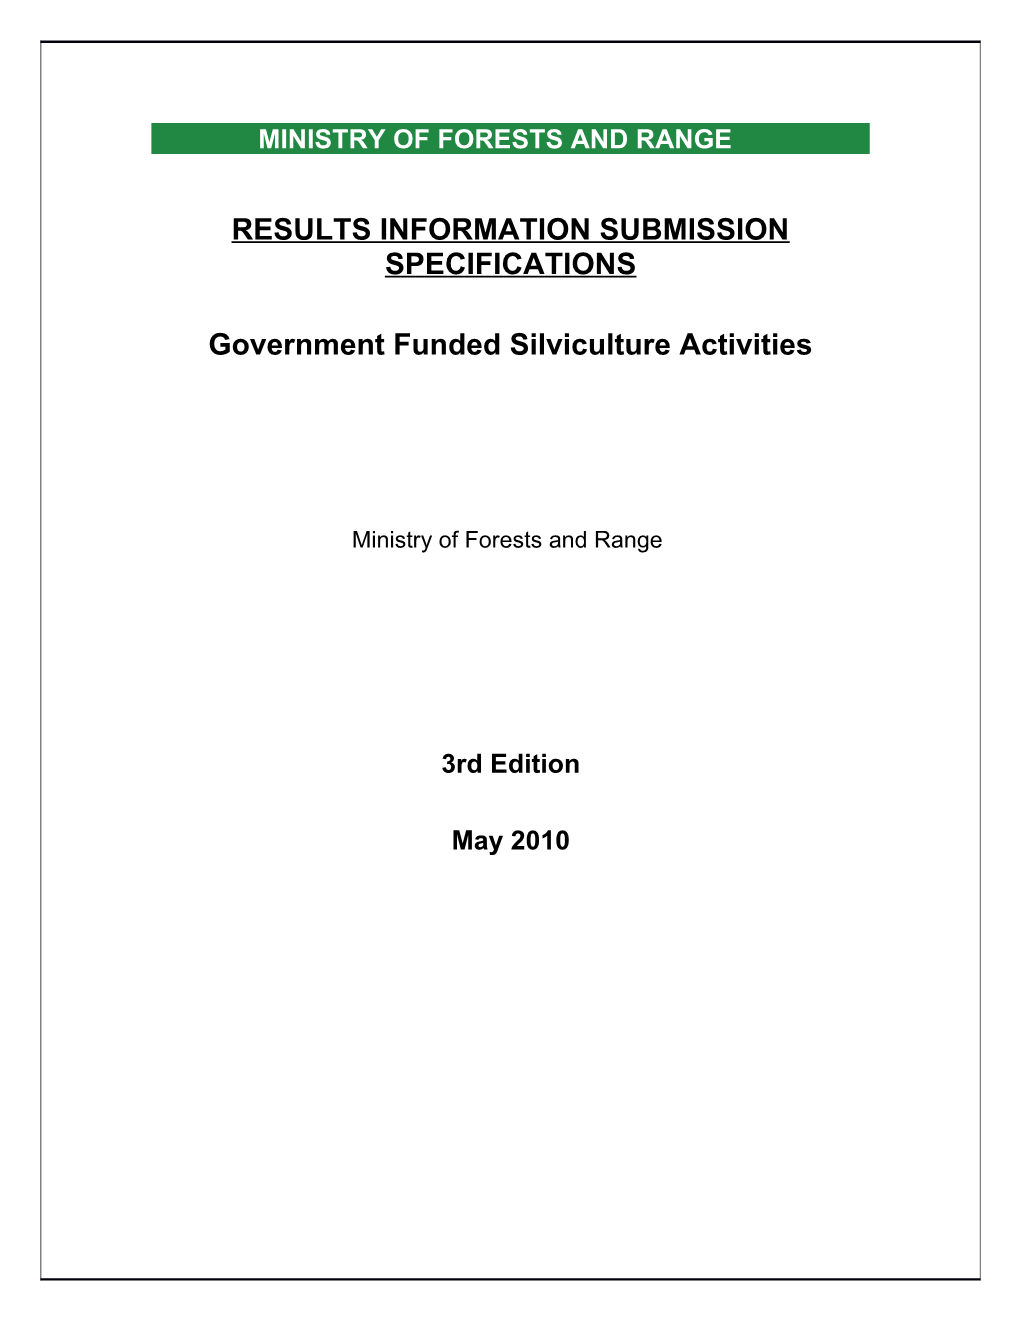 RESULTS Information Submission Specifications